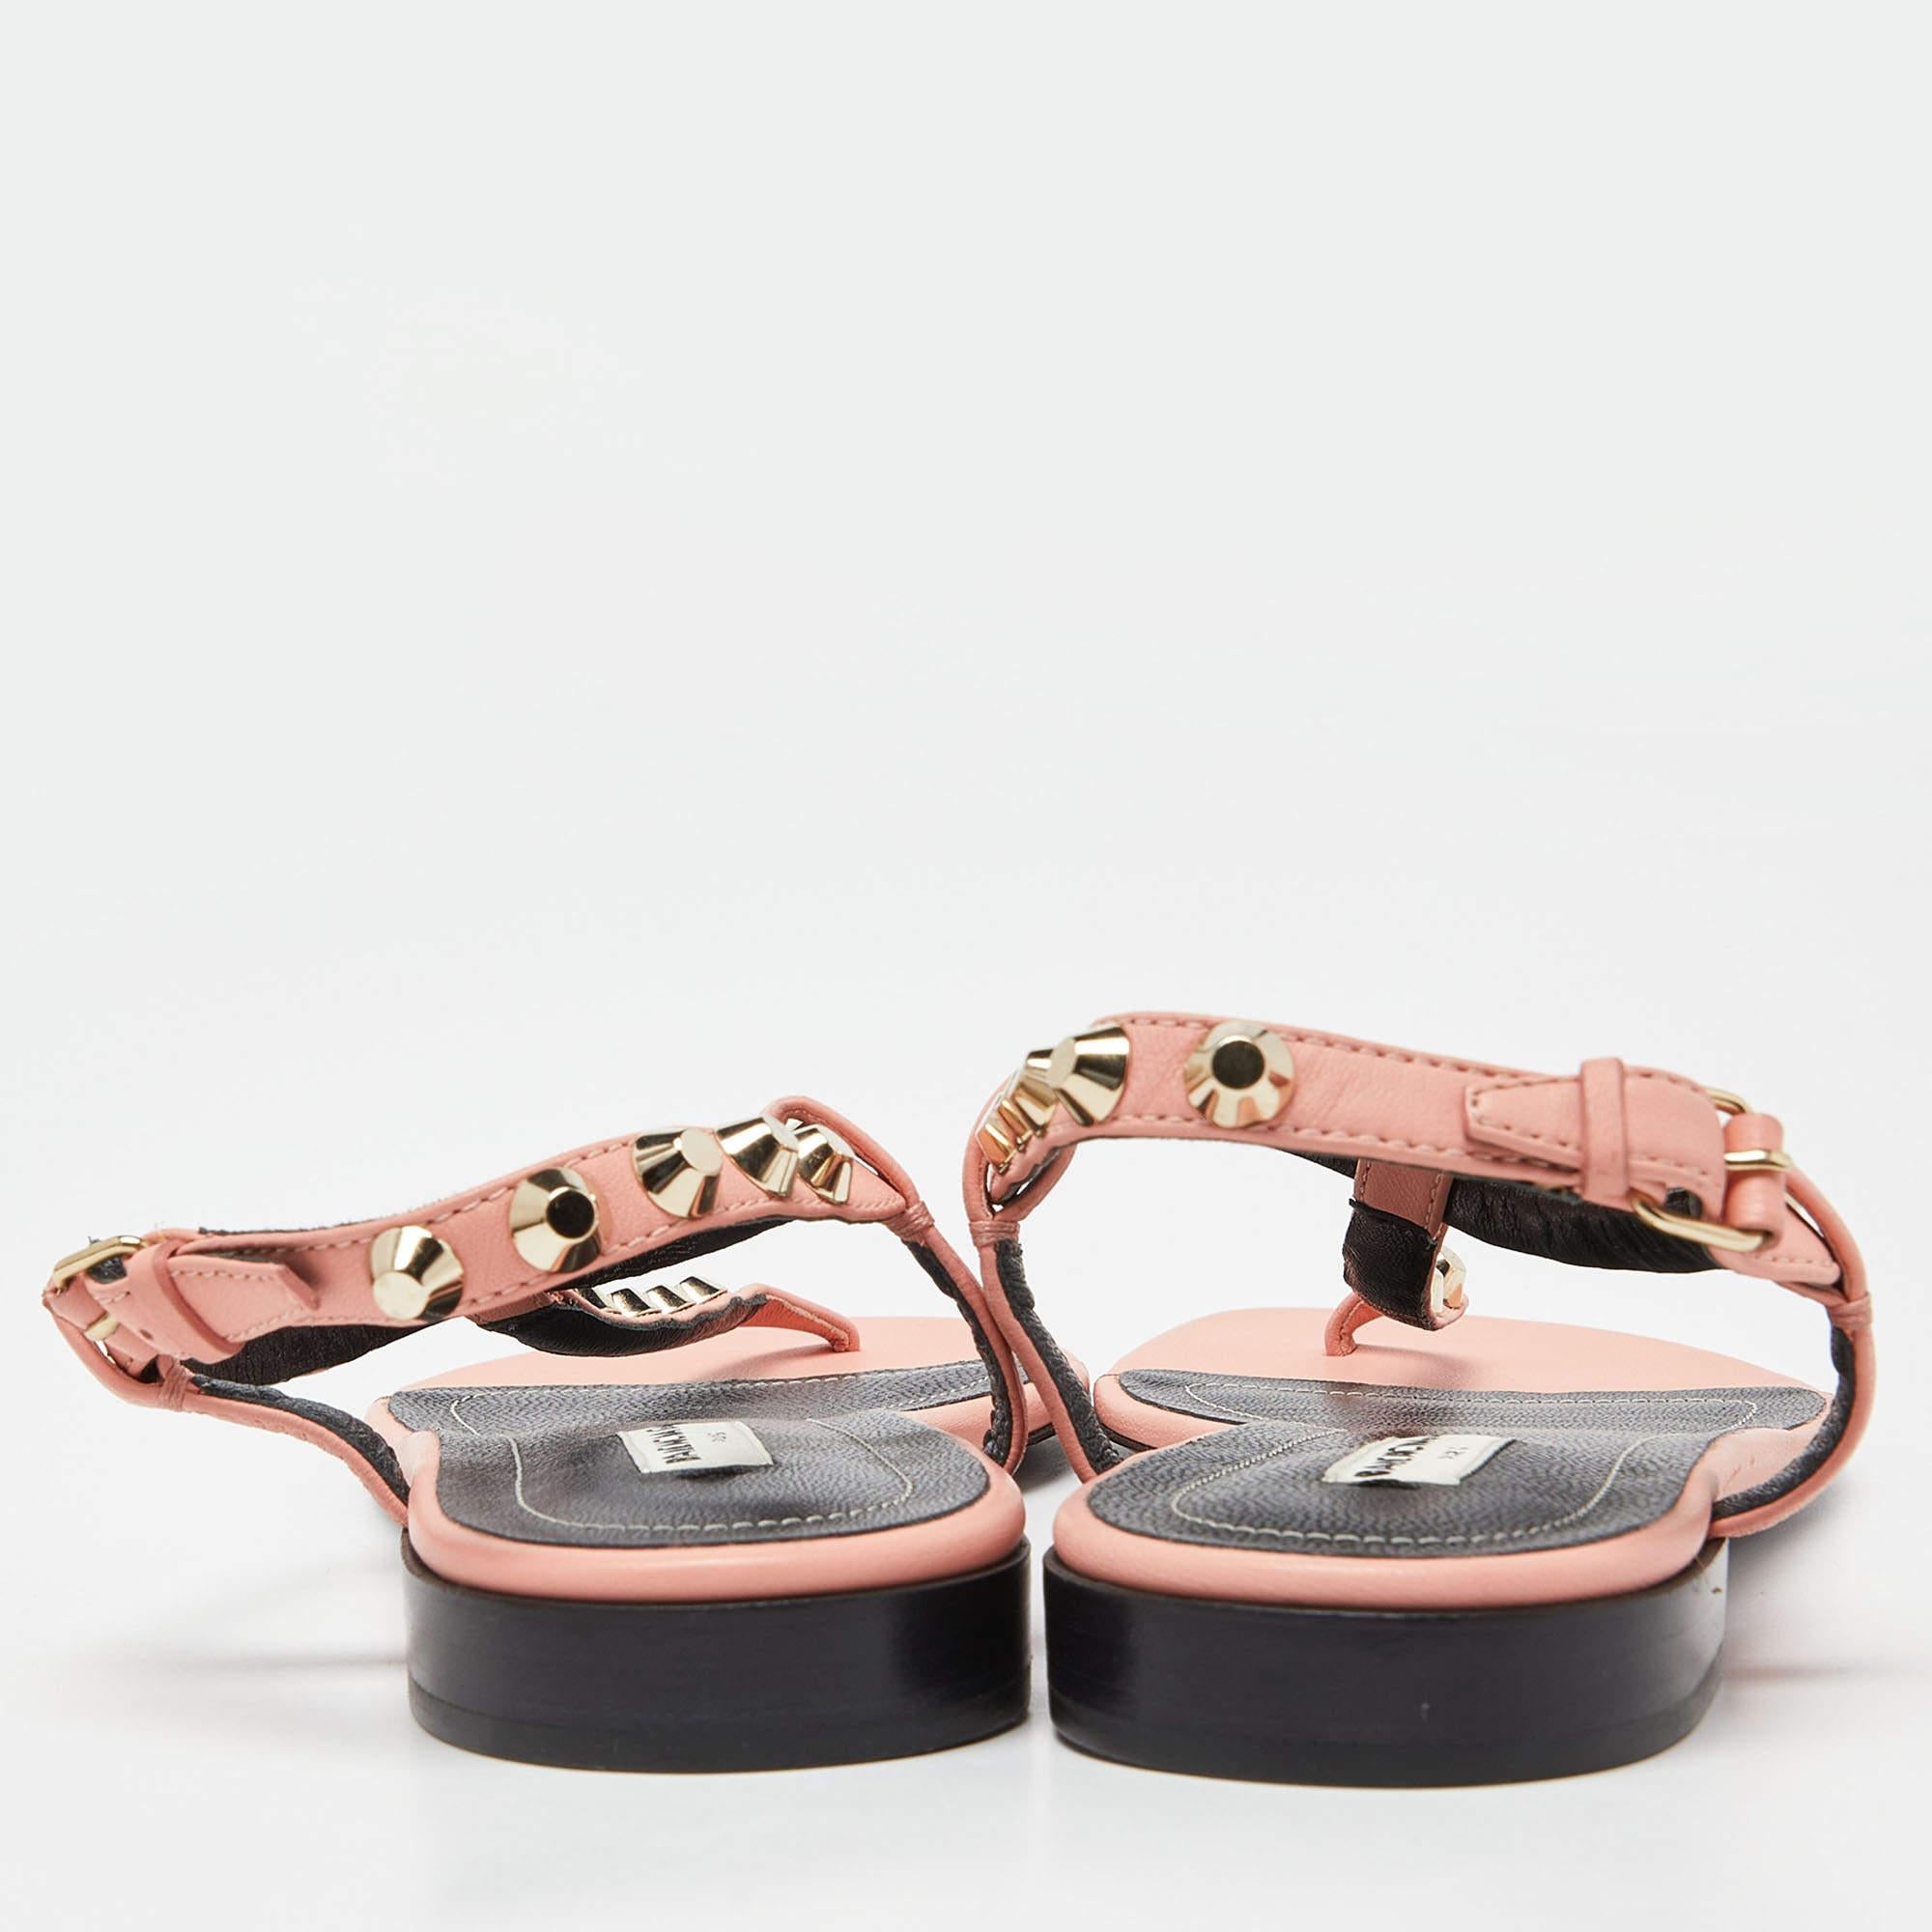 Balenciaga Peach/Black Leather Arena Thong Sandals Size 38 For Sale 2